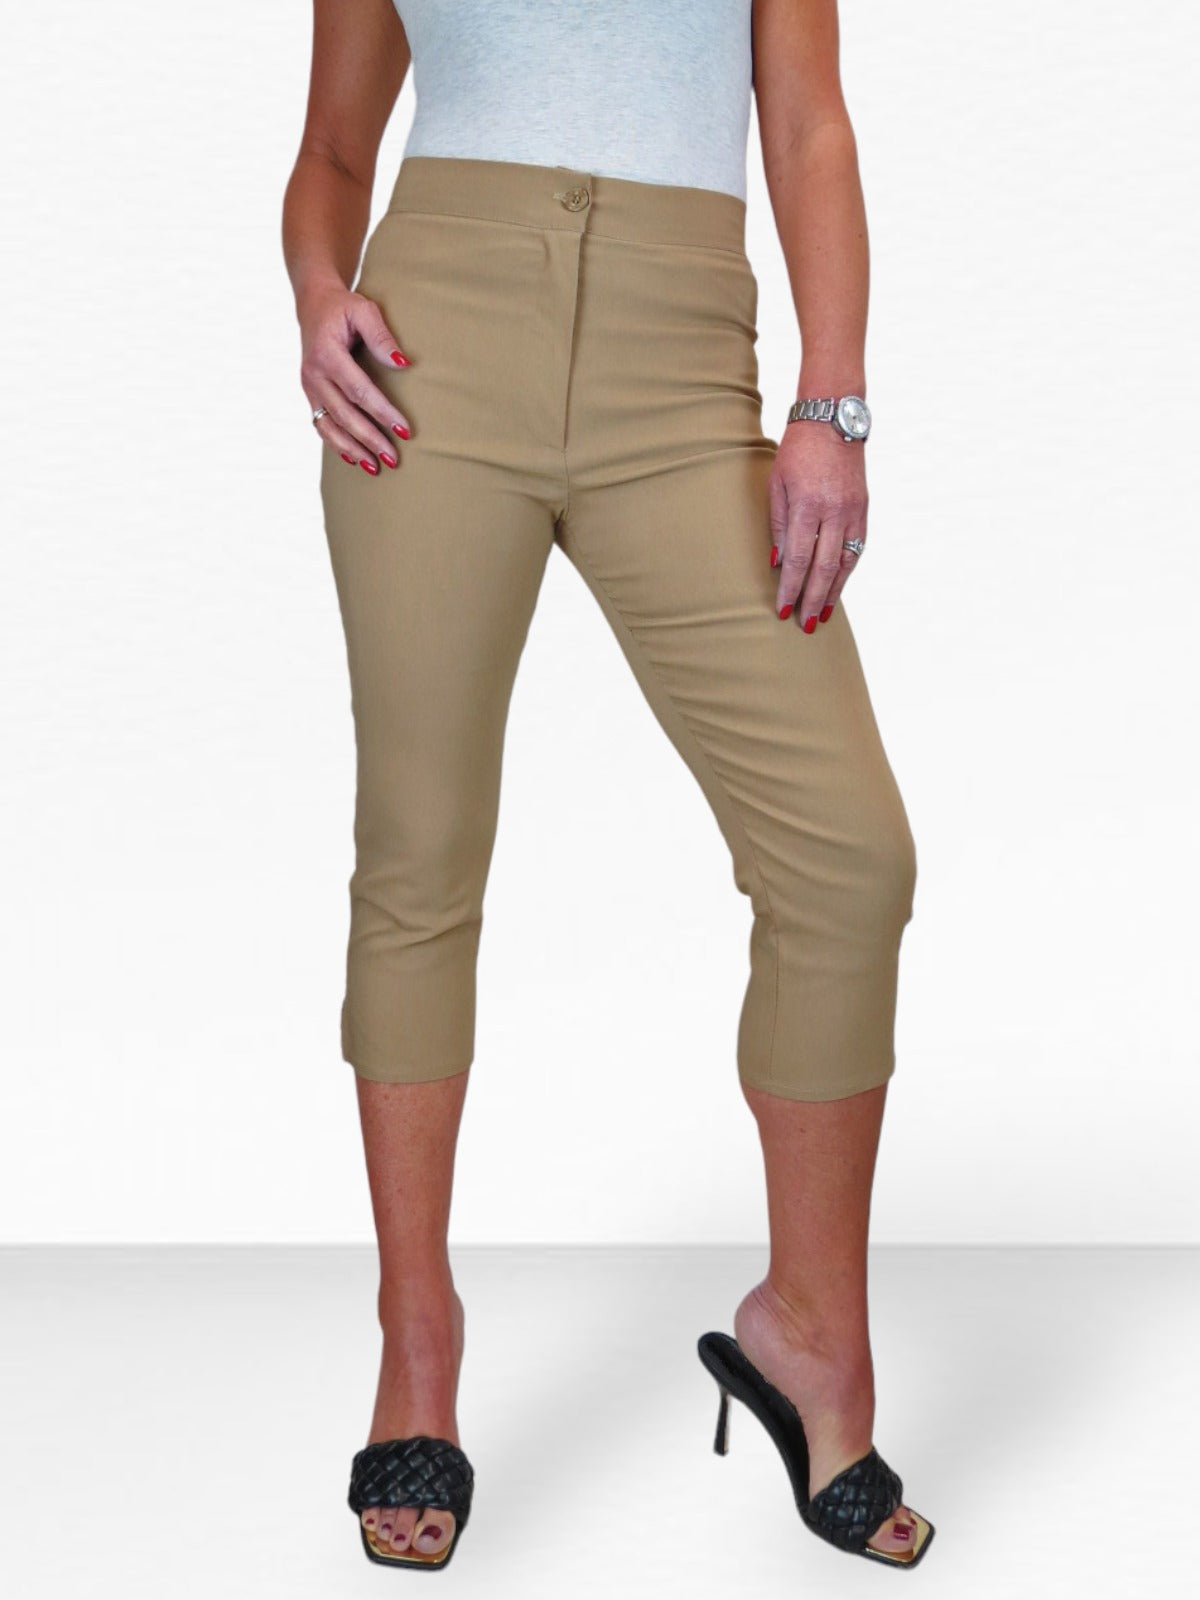 High Waisted Cropped Skinny Pedal Pushers Trousers Camel Beige